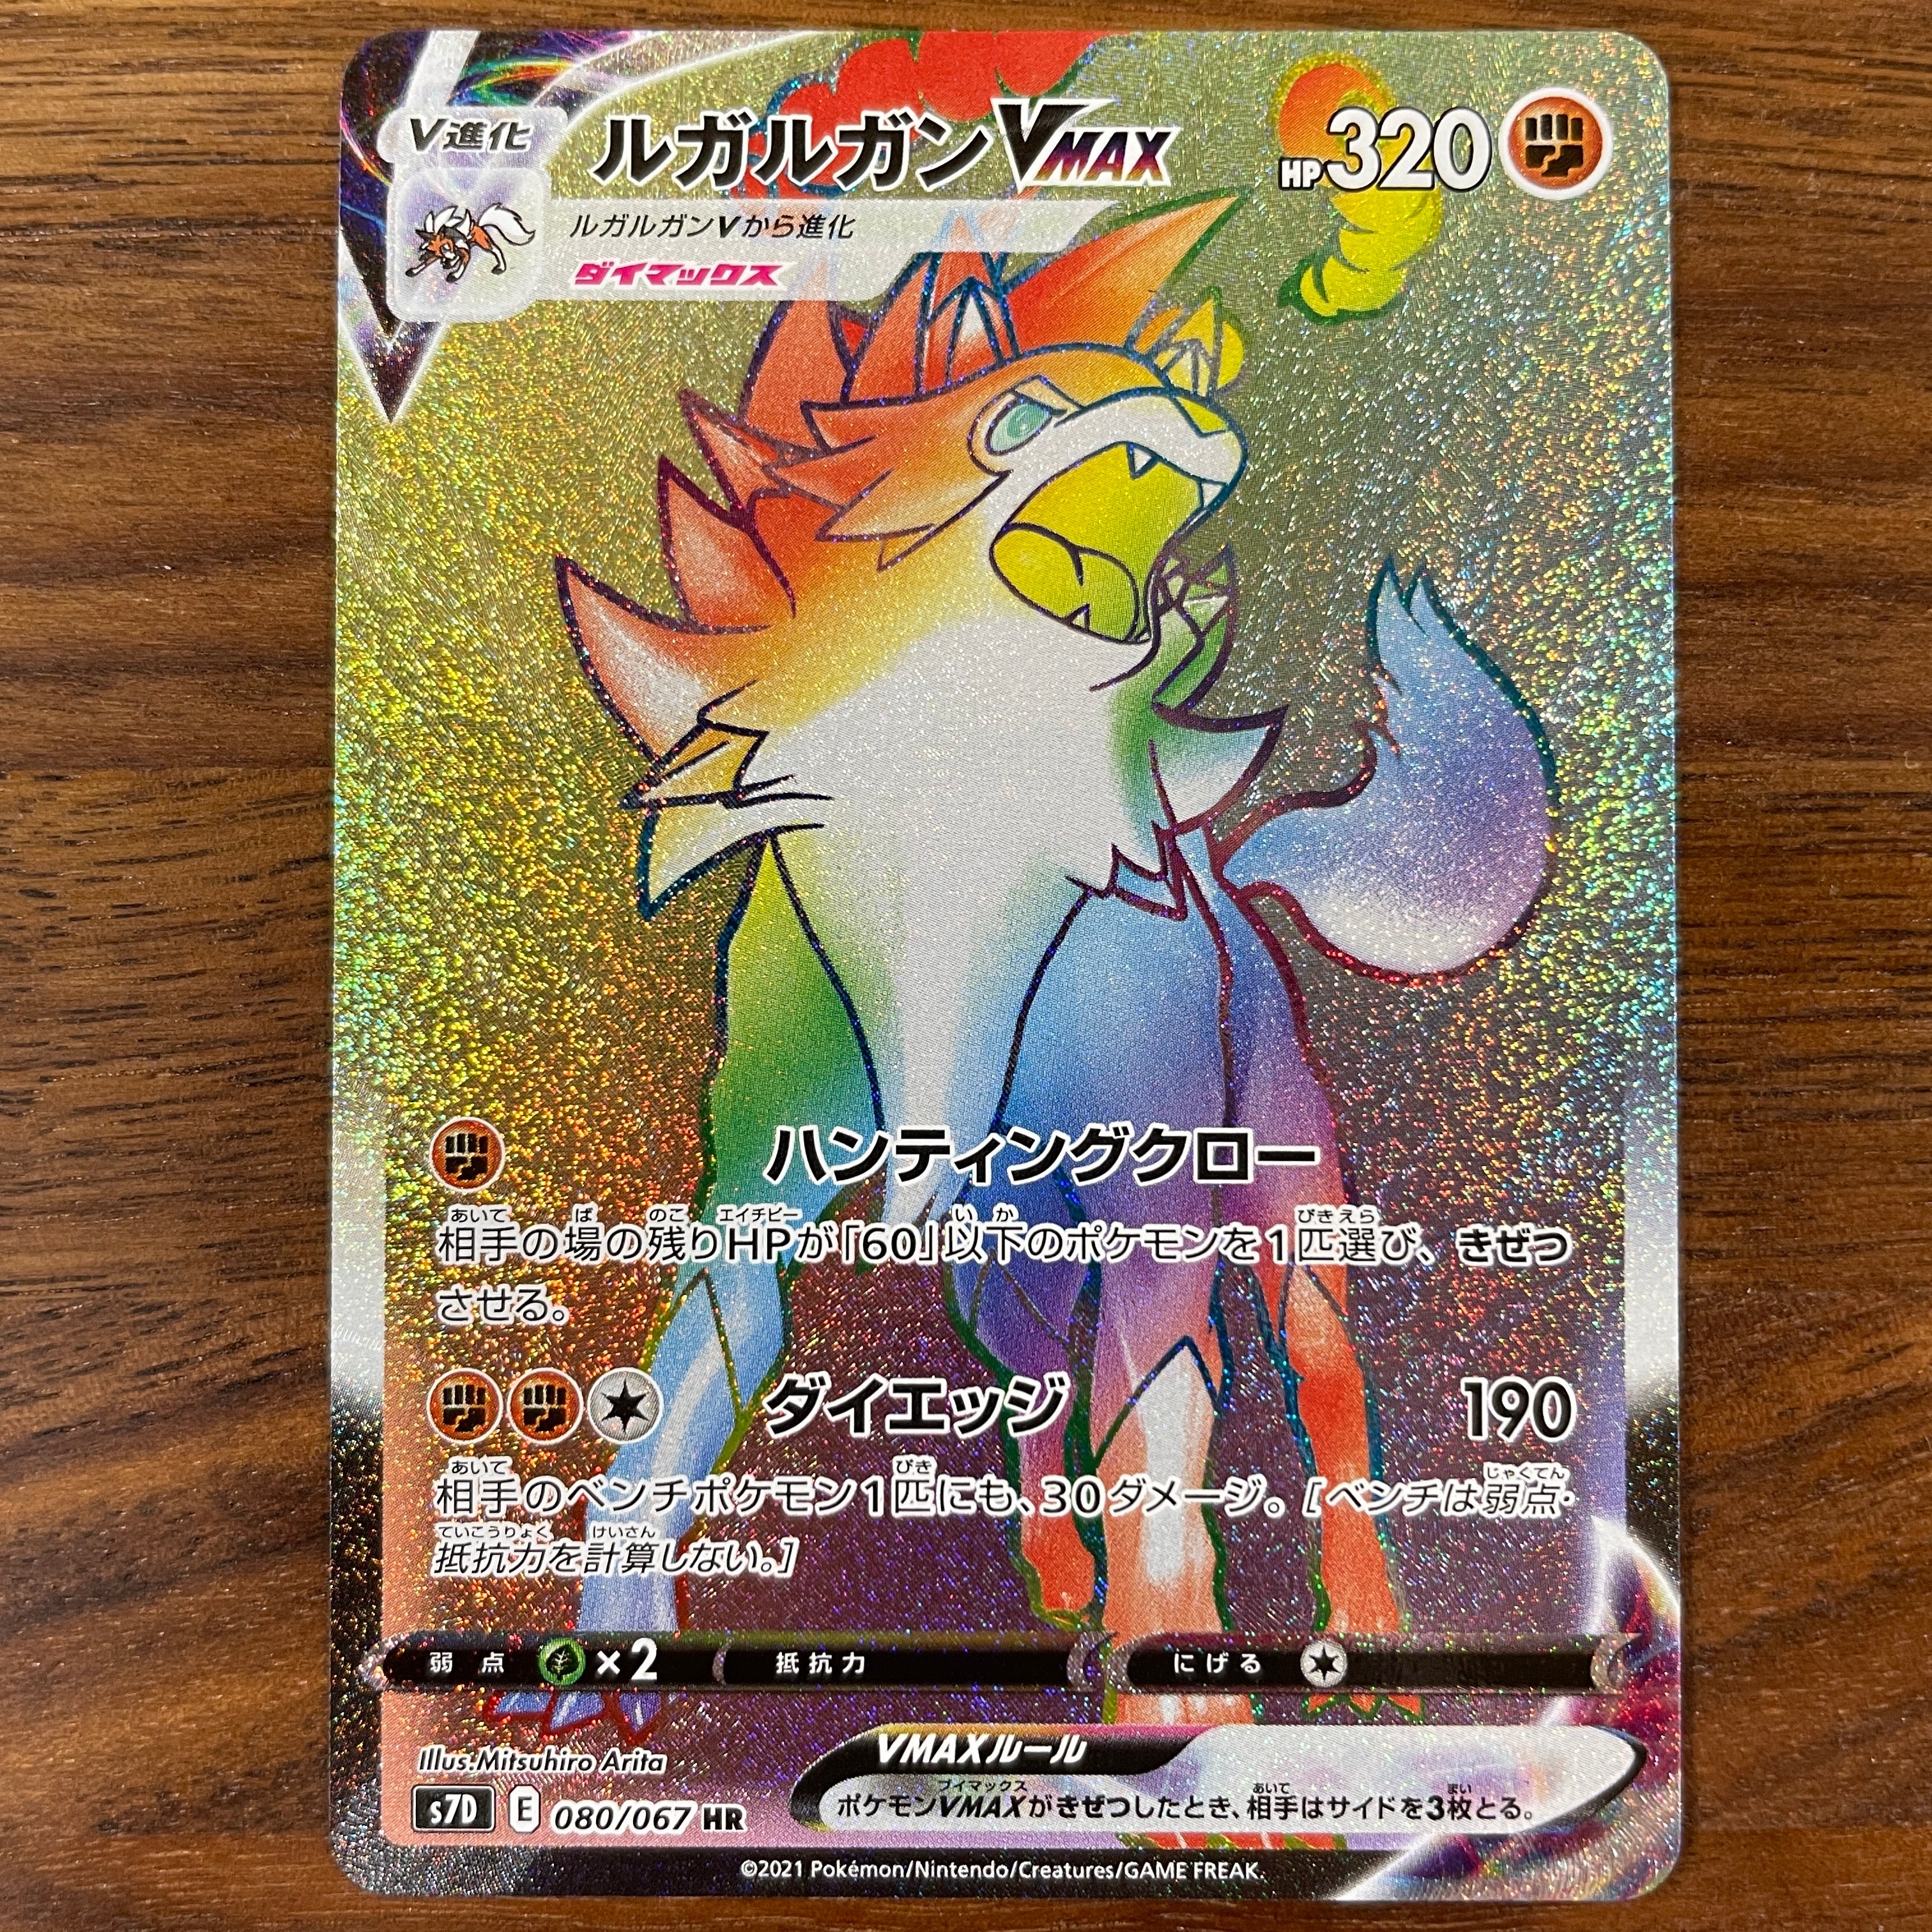 POKÉMON CARD GAME Sword & Shield Expansion pack ｢Skyscraping Perfect｣  POKÉMON CARD GAME S7D 080/069 Hyper Rare card  Lycanroc VMAX